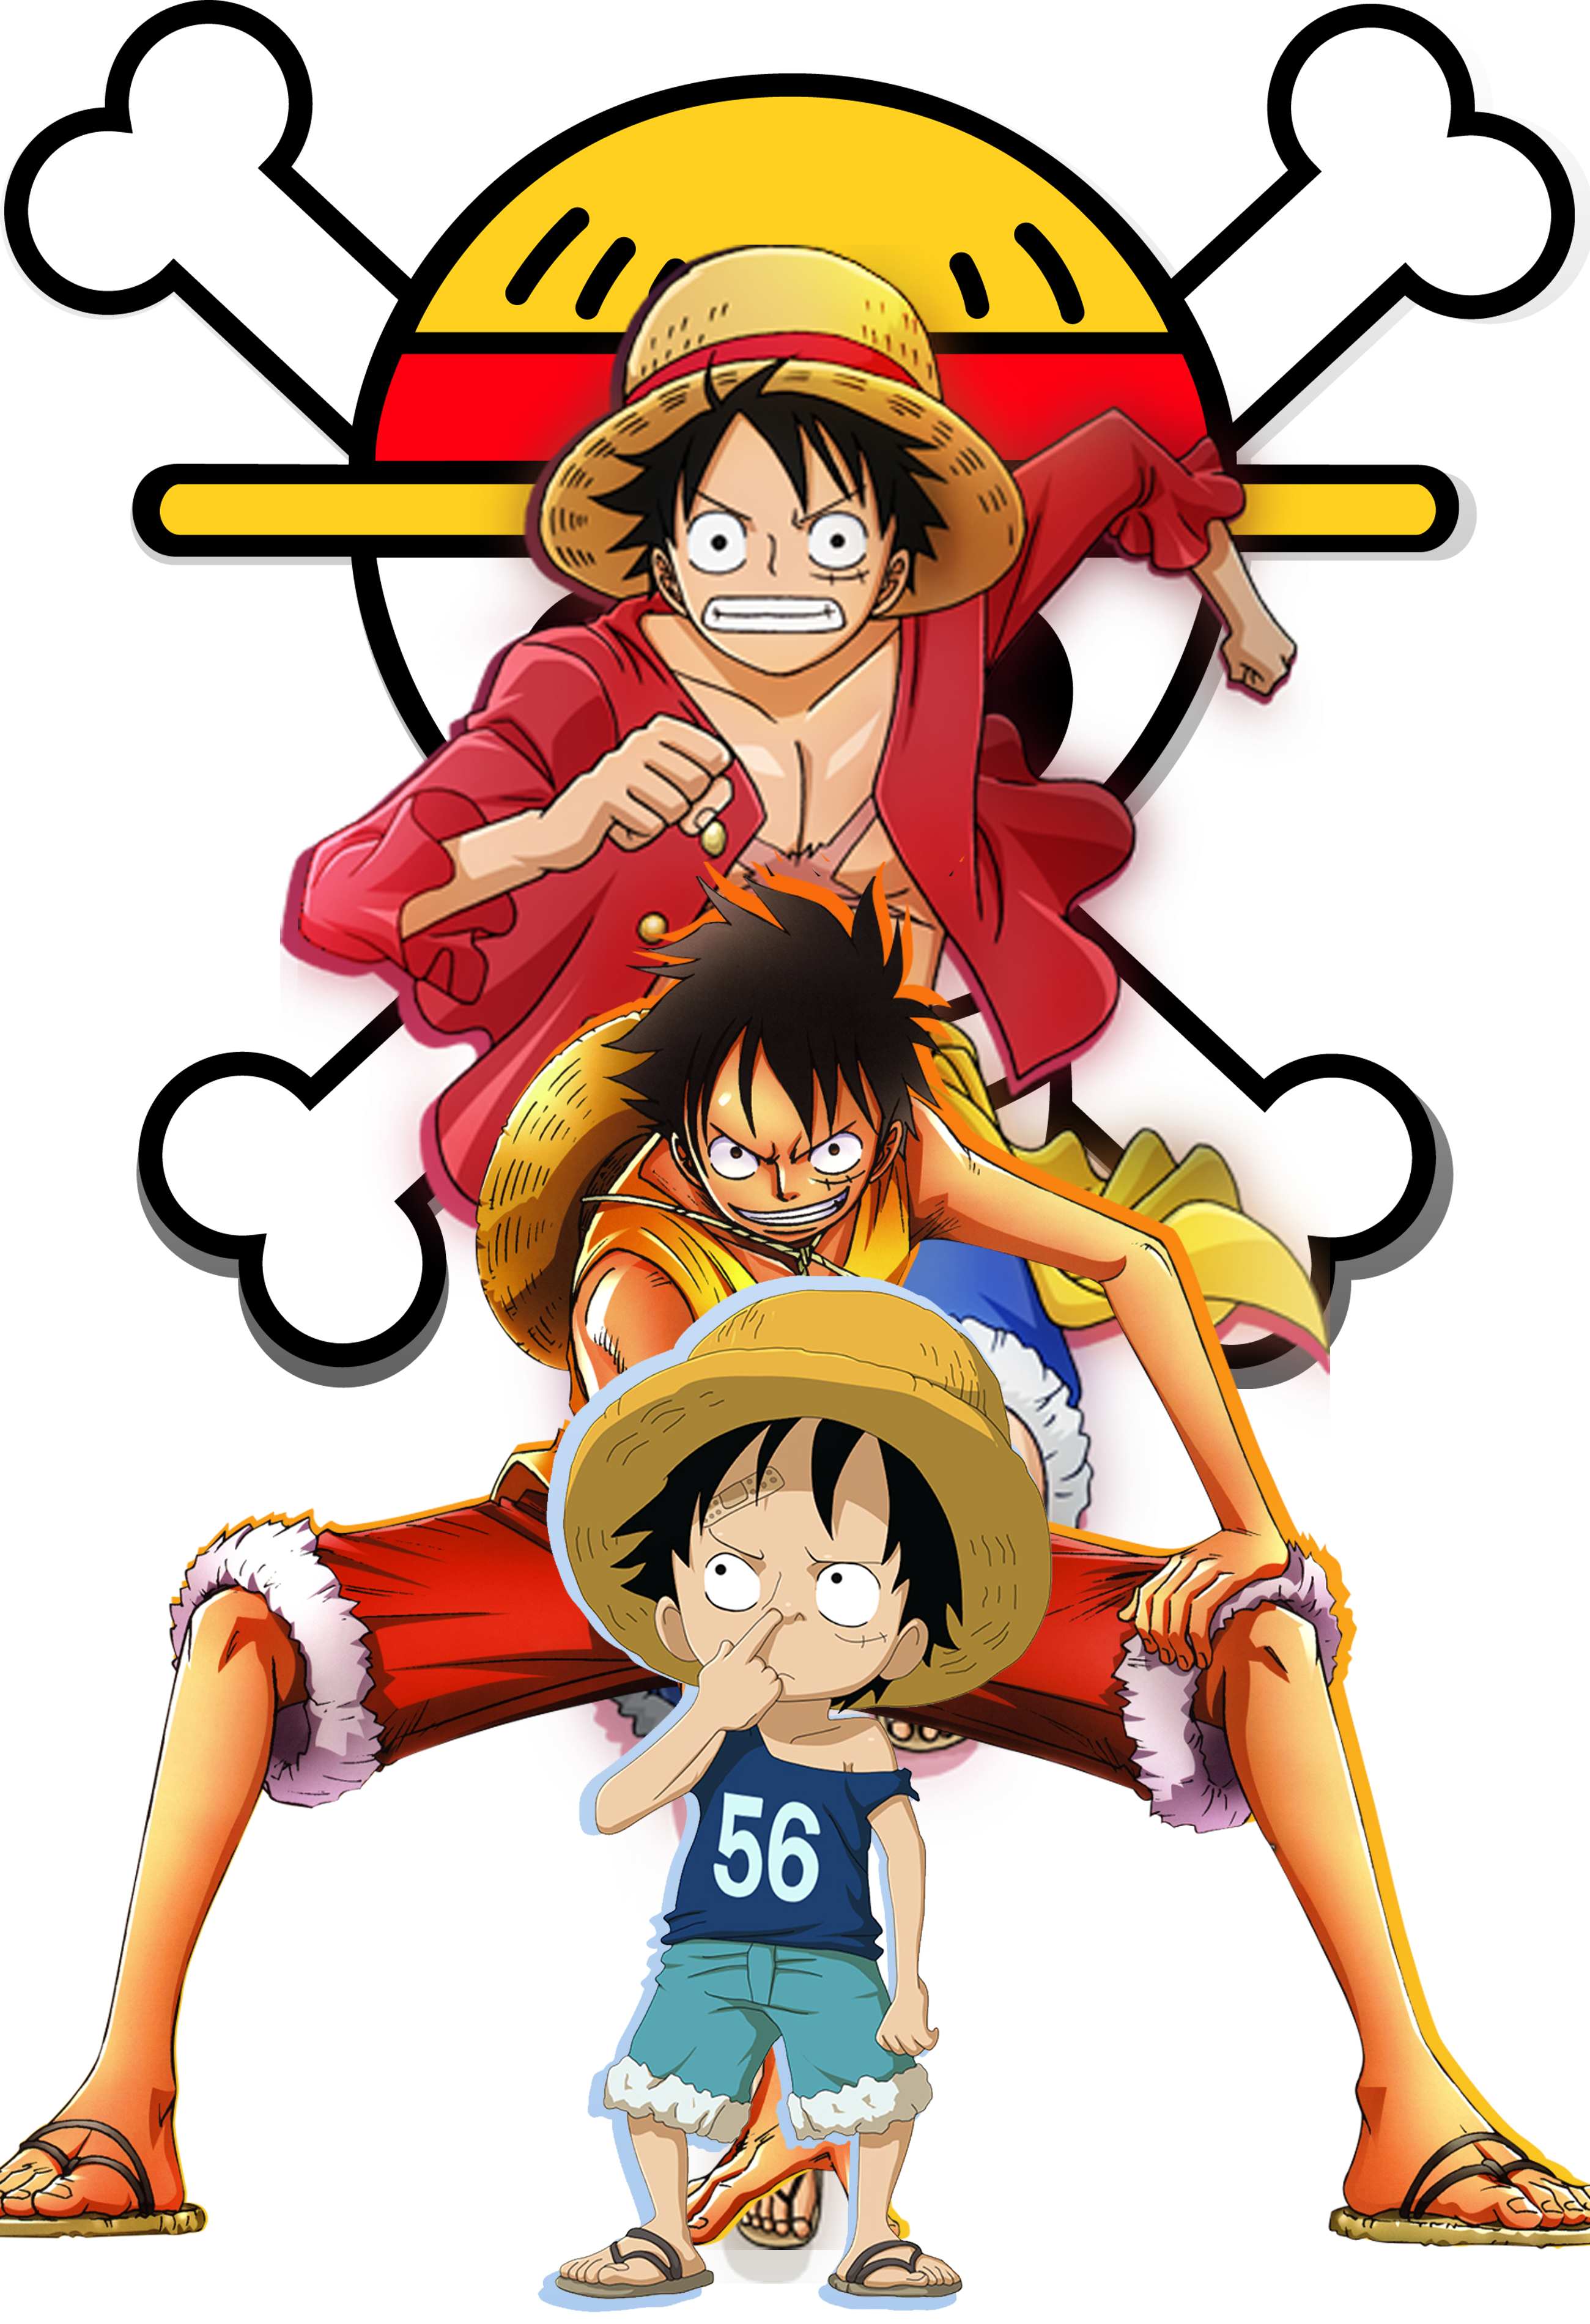 One piece Anime Straw Hat Pirates Captain Monkey D Luffy Mugiwara Logo And Transformation Luffy Kid Luffy Teen Luffy Adult by Stranger-s | Redbubble